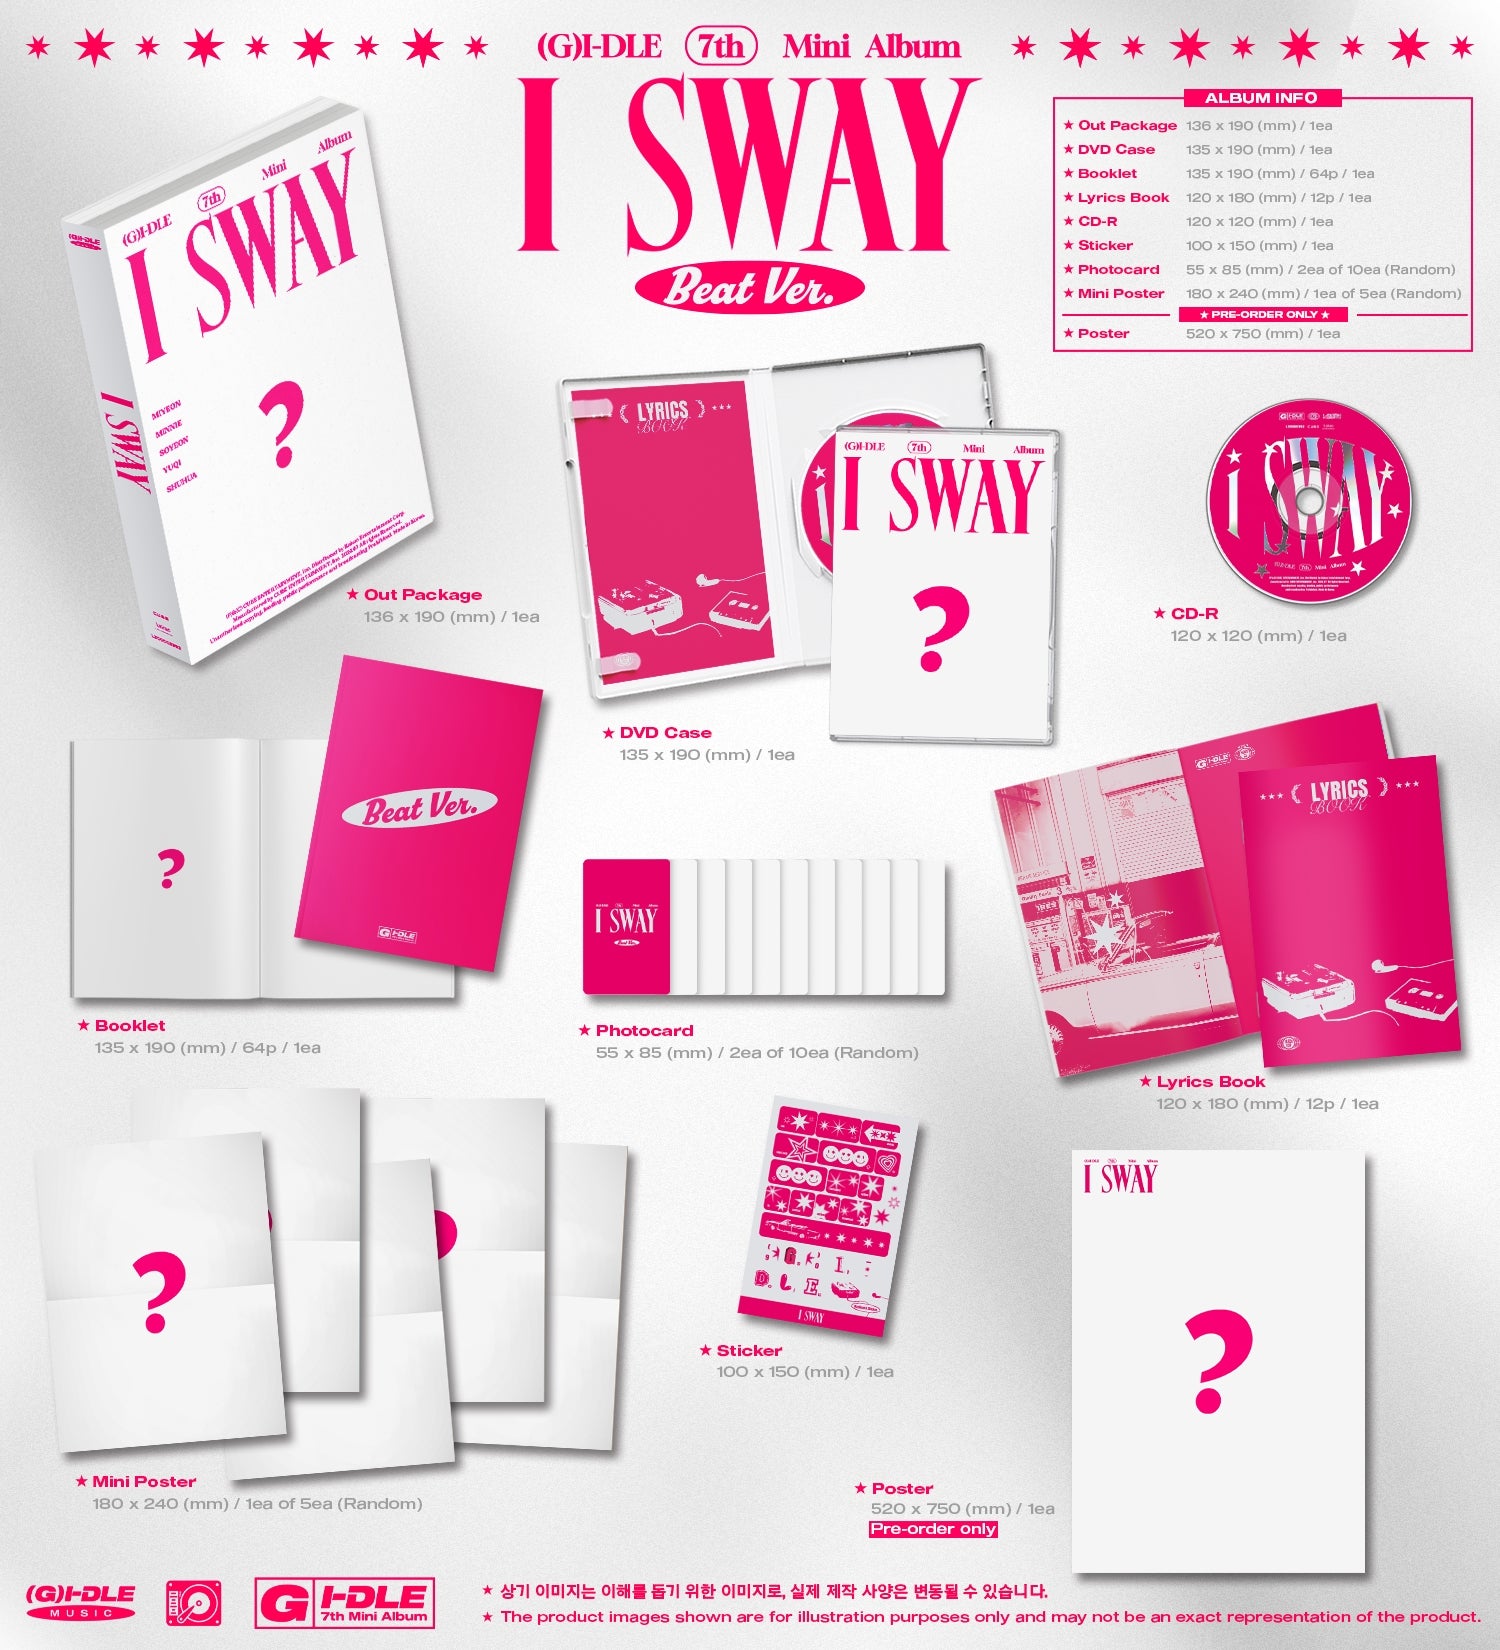 (G)I-DLE 7th Mini Album I SWAY - Beat Version Inclusions: Out Package, DVD Case, Booklet, Lyrics Book, CD, Stickers, Photocards, Mini Poster, Pre-order Poster